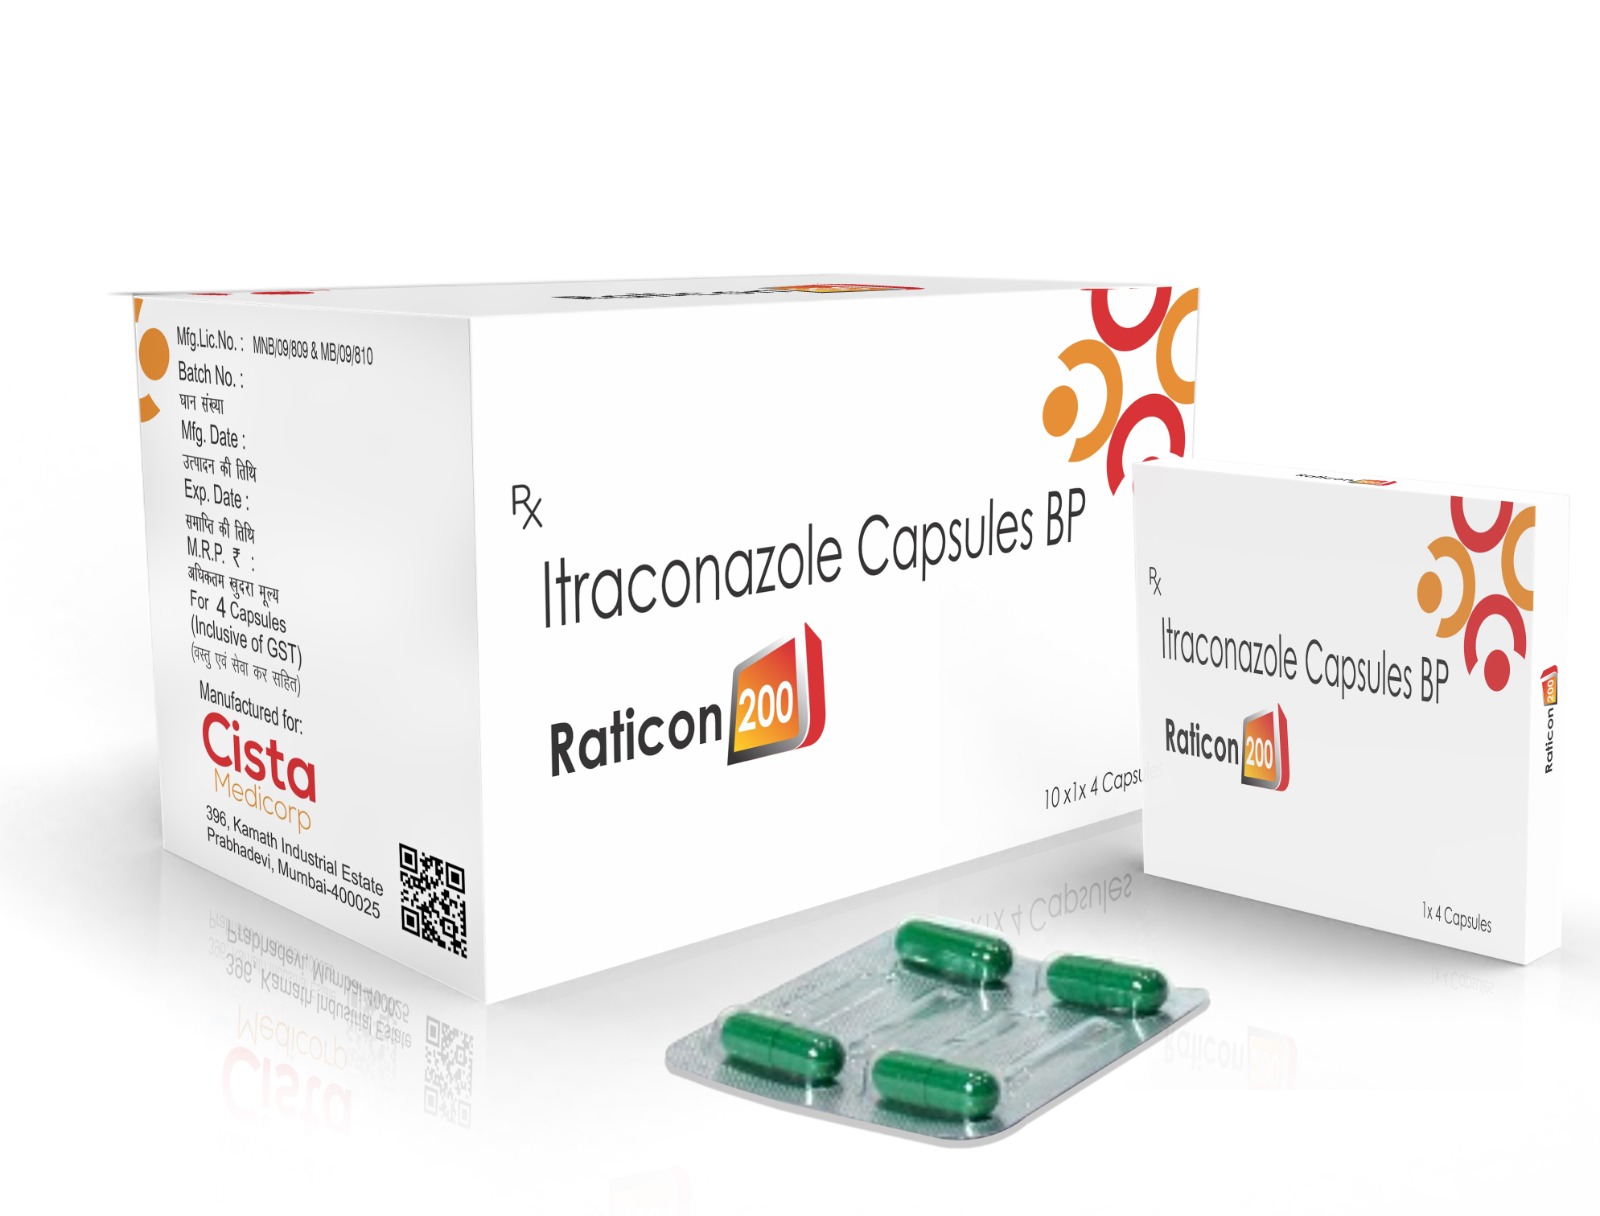 Raticon 200 Capsules with Itraconazole 200mg Capsules 